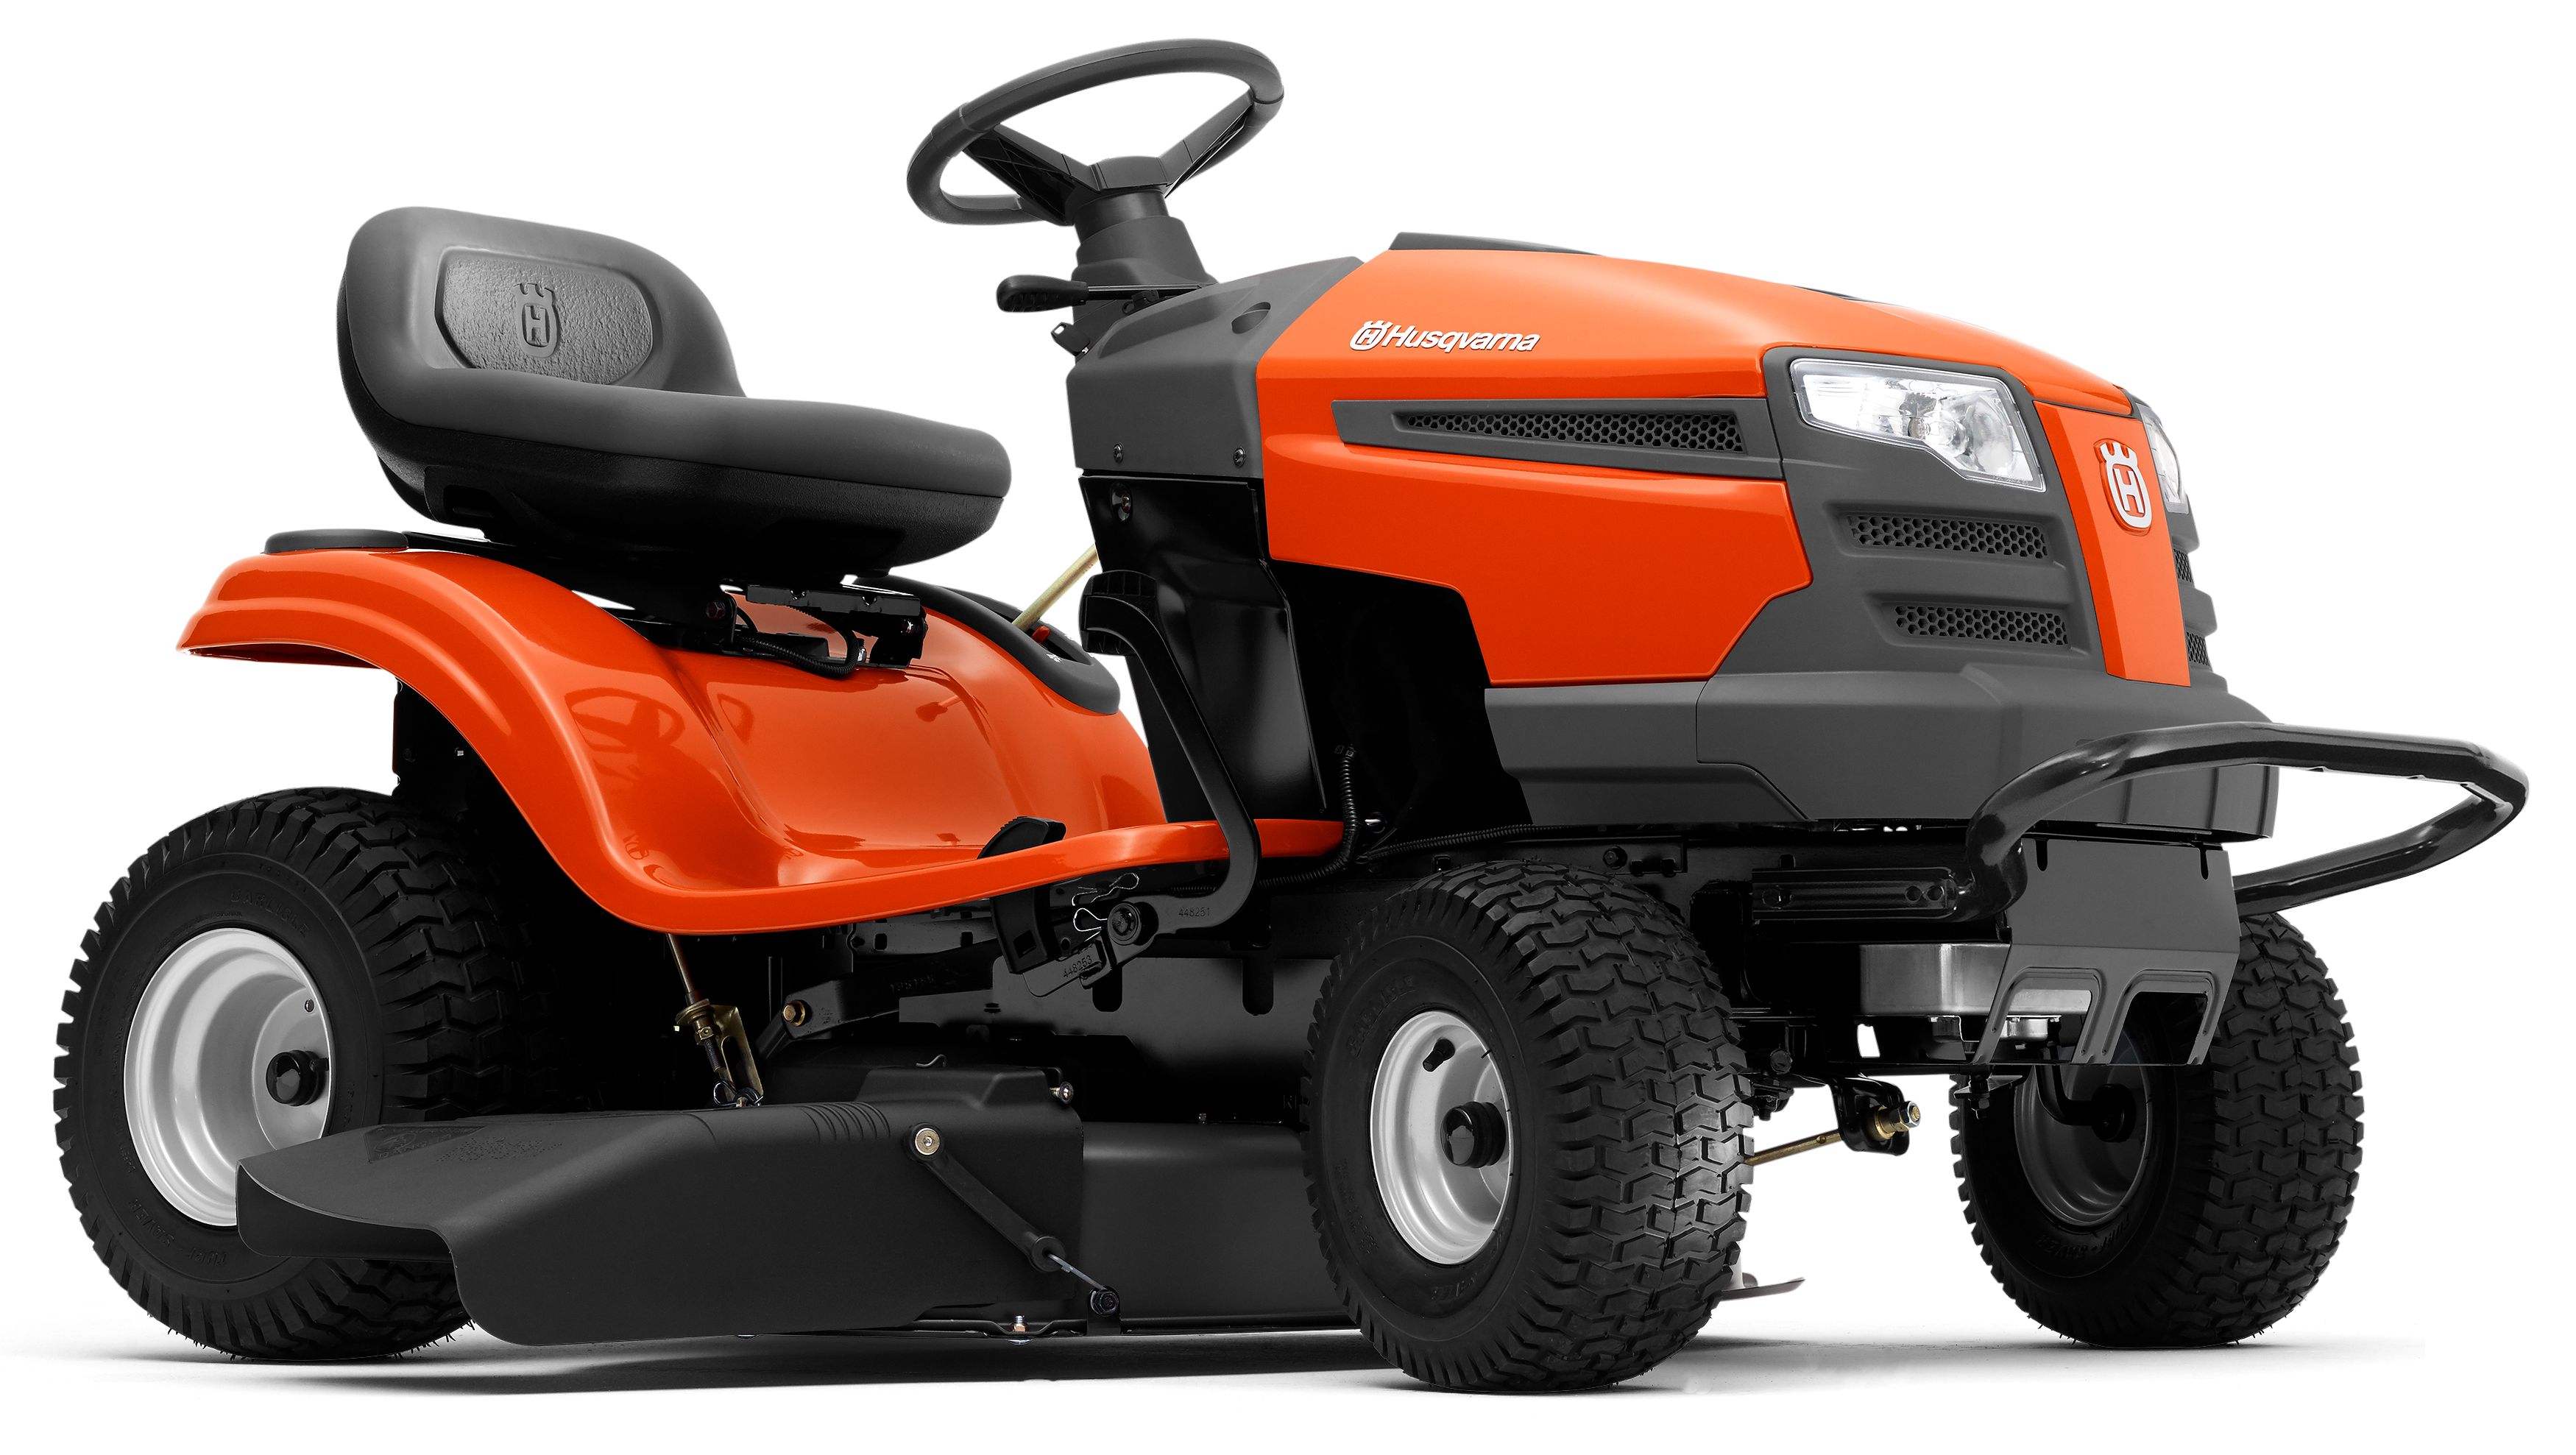 https://mightymowers.com.au/wp-content/uploads/2019/06/ts138.png